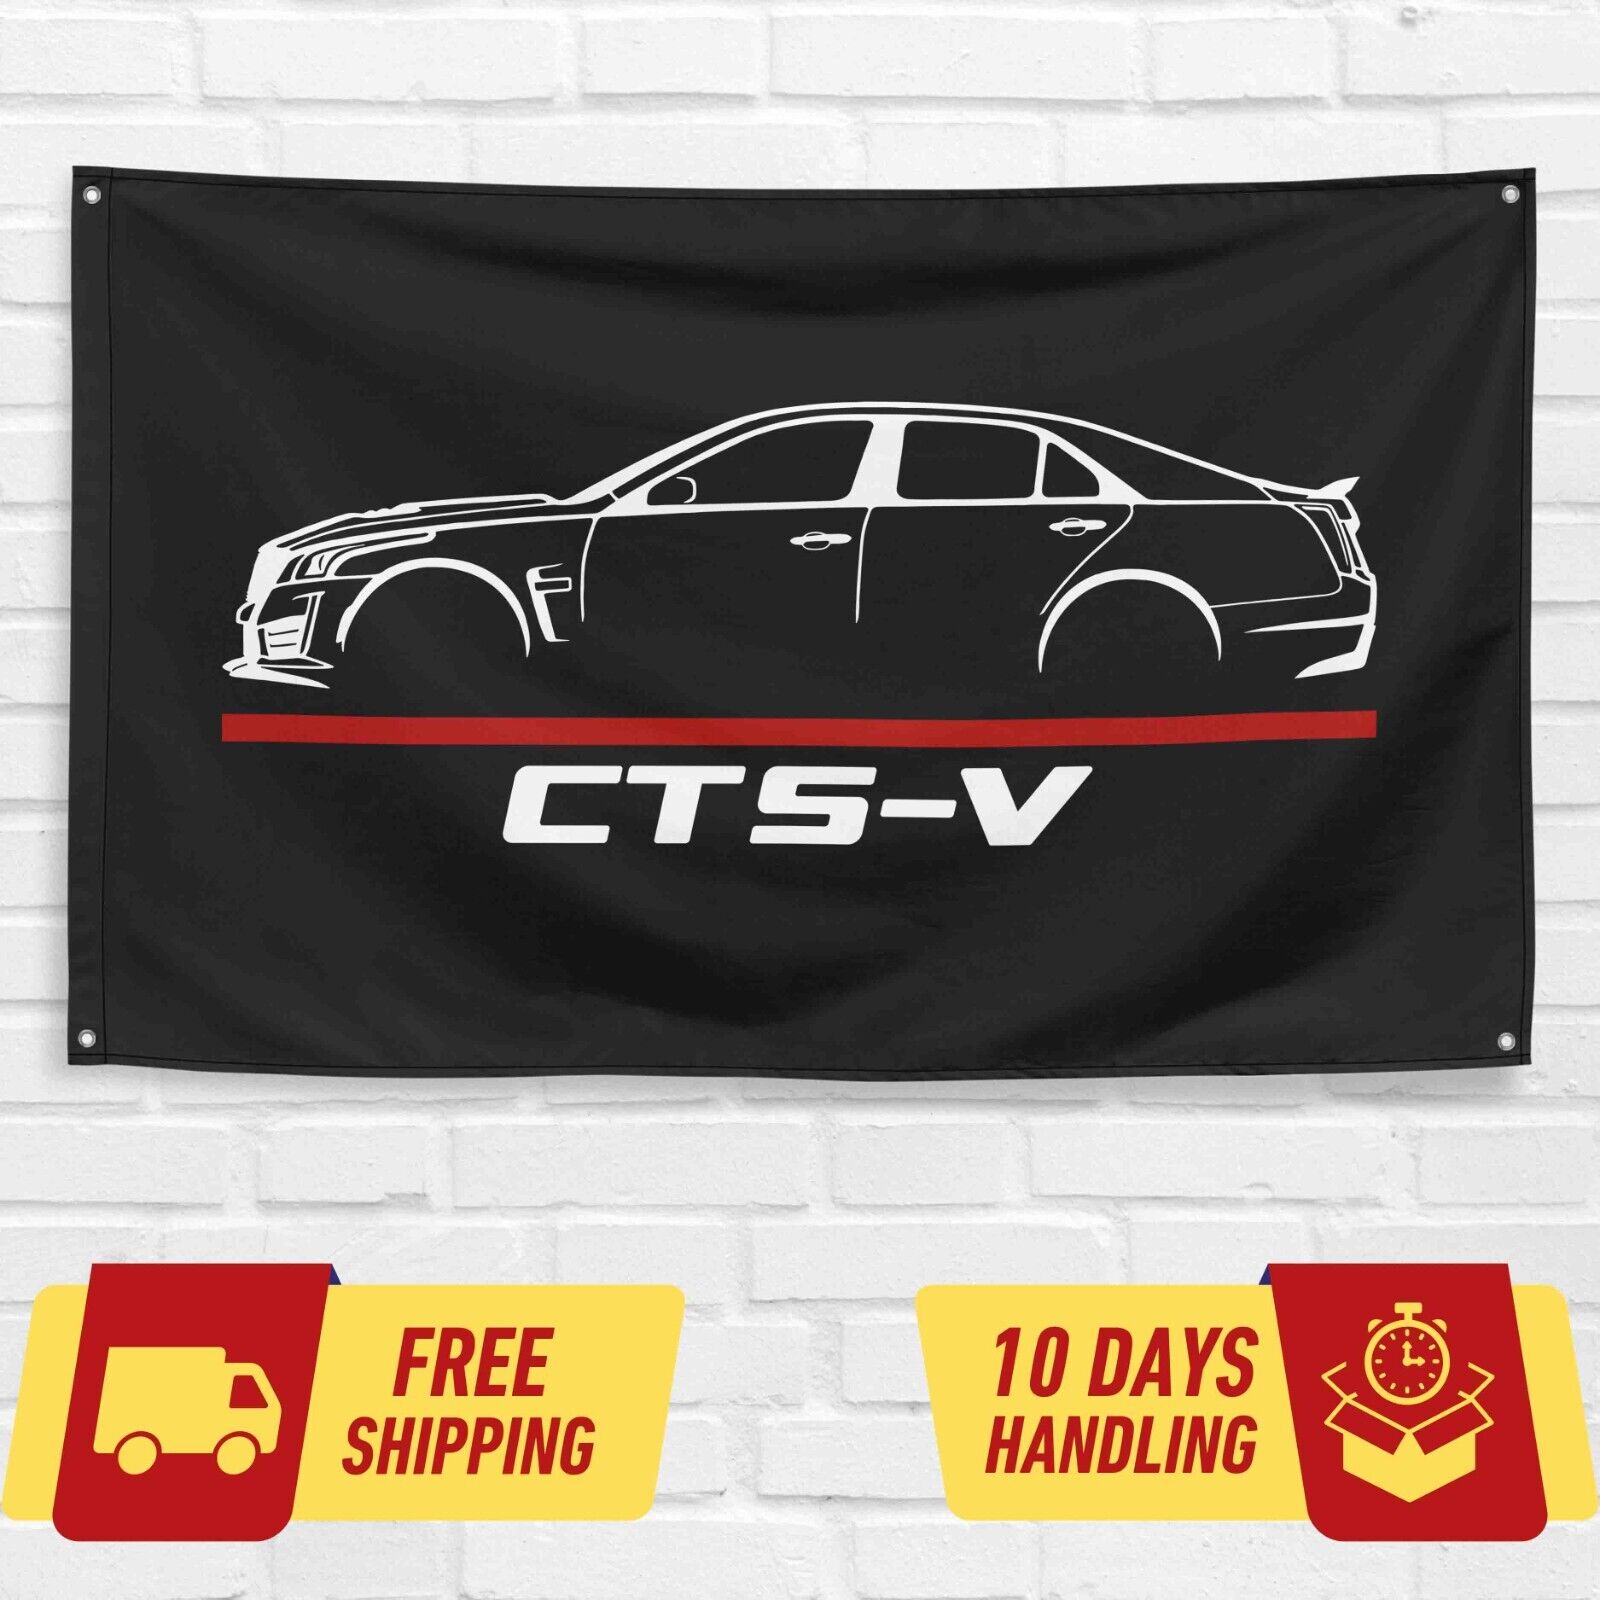 For Cadillac CTS-V 2016 Car Enthusiast 3x5 ft Flag Birthday Gift Banner